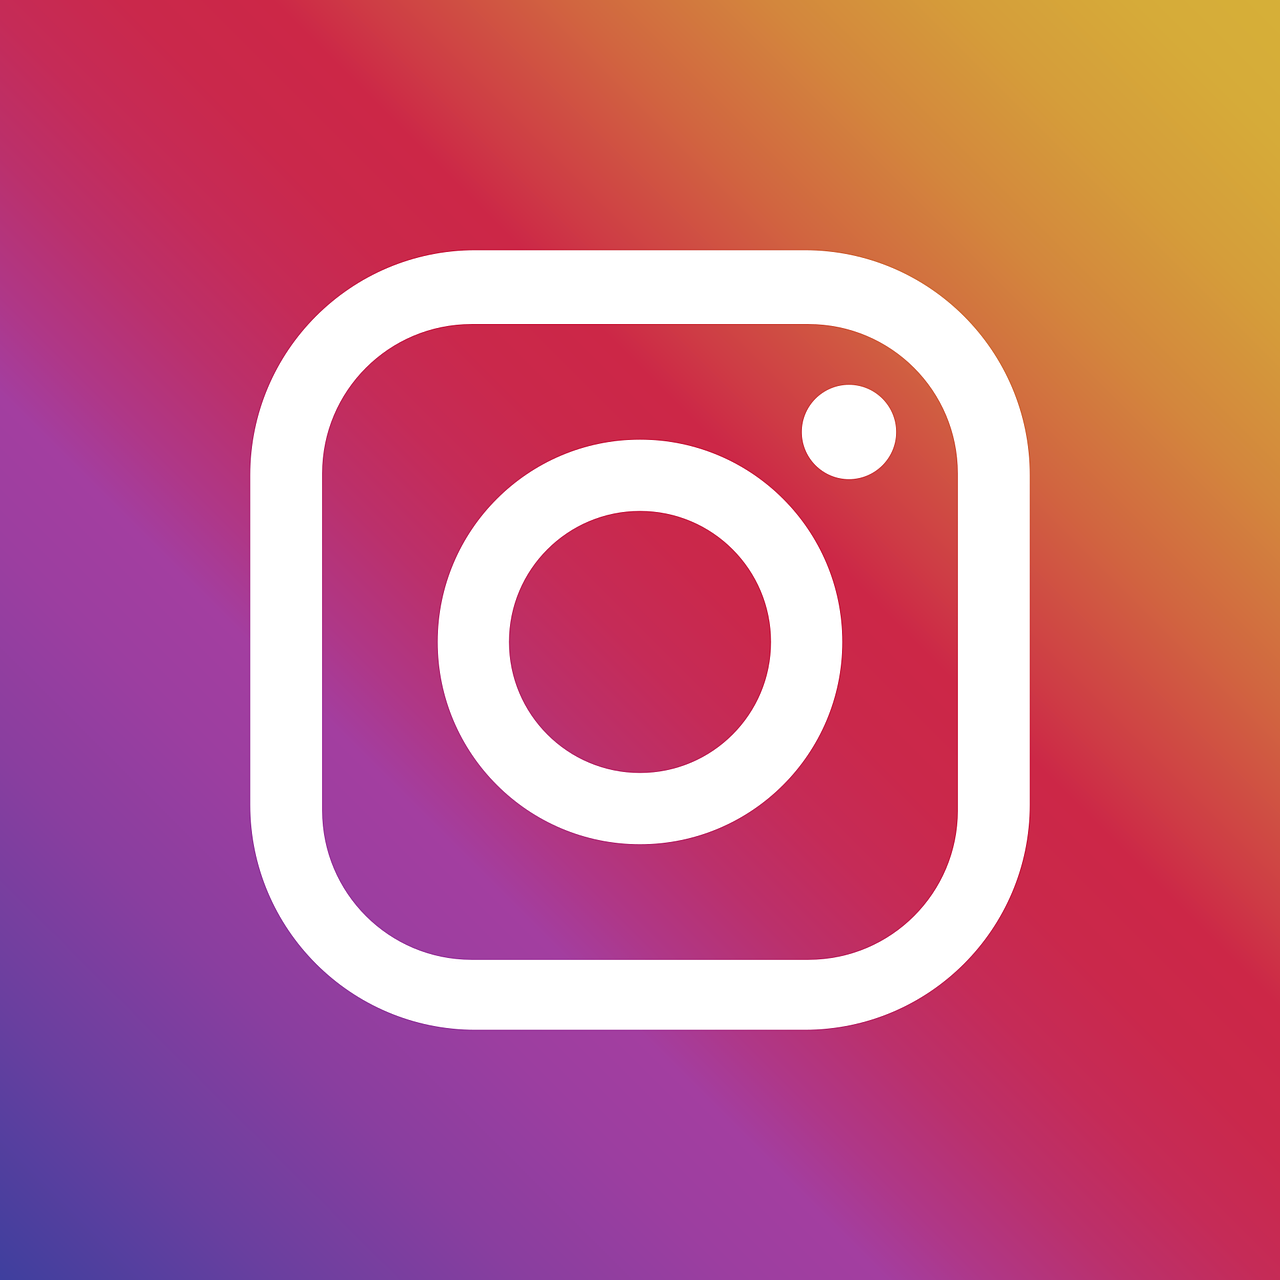 Reach 10k Followers on Instagram Quickly and Easily